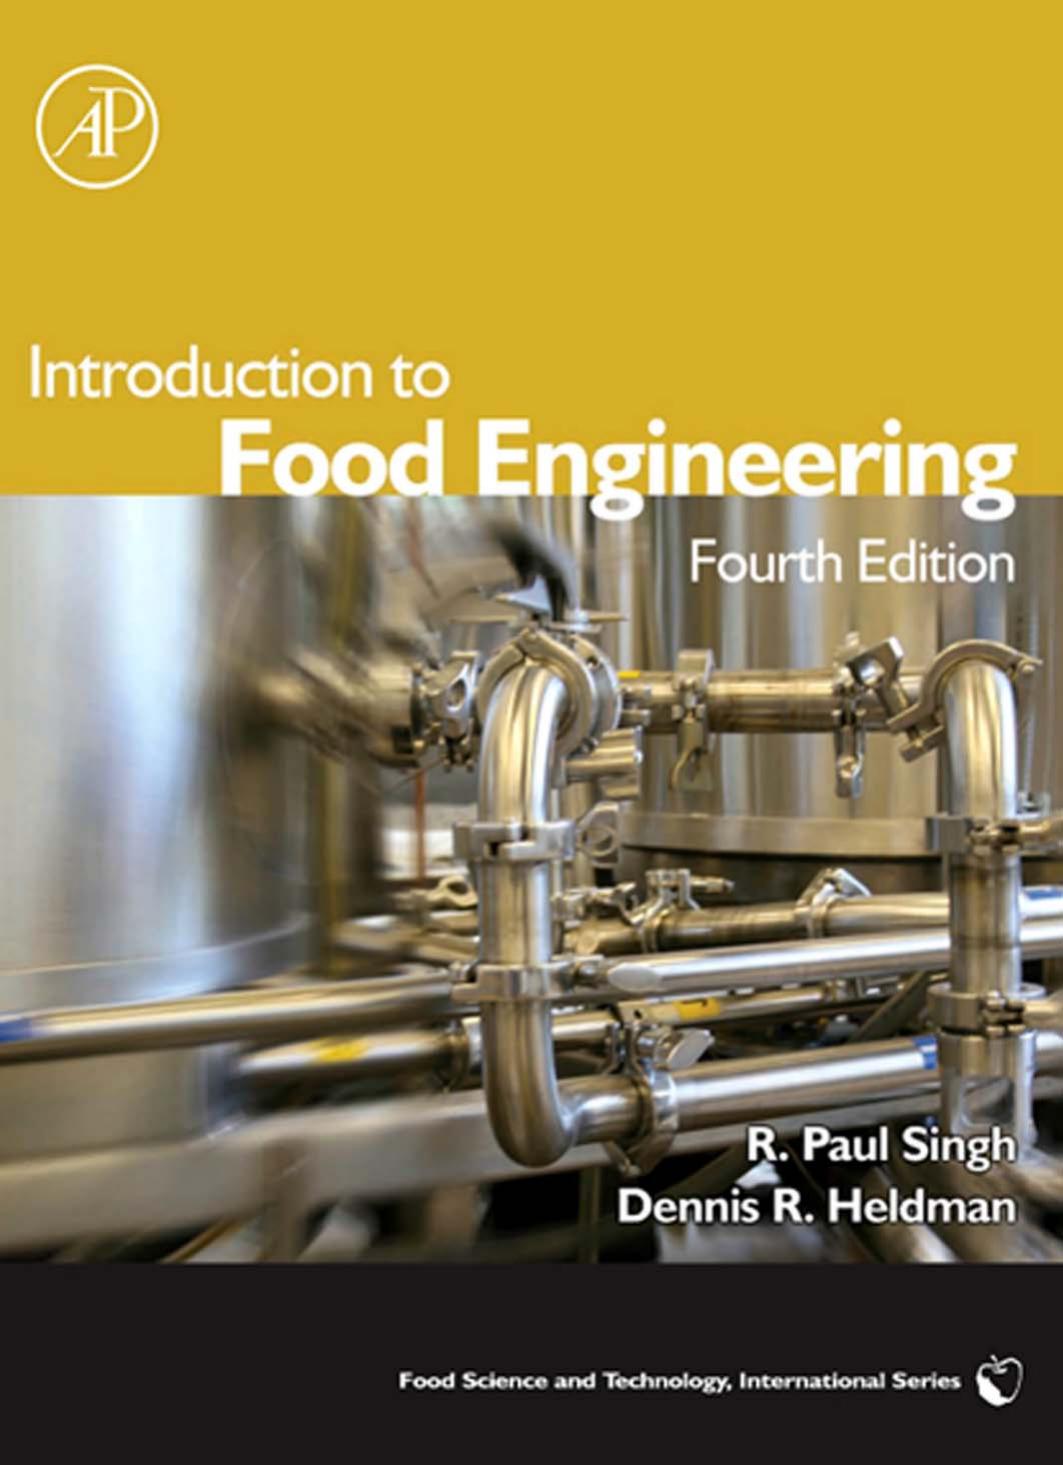 Introduction to Food Engineering, Fourth Edition